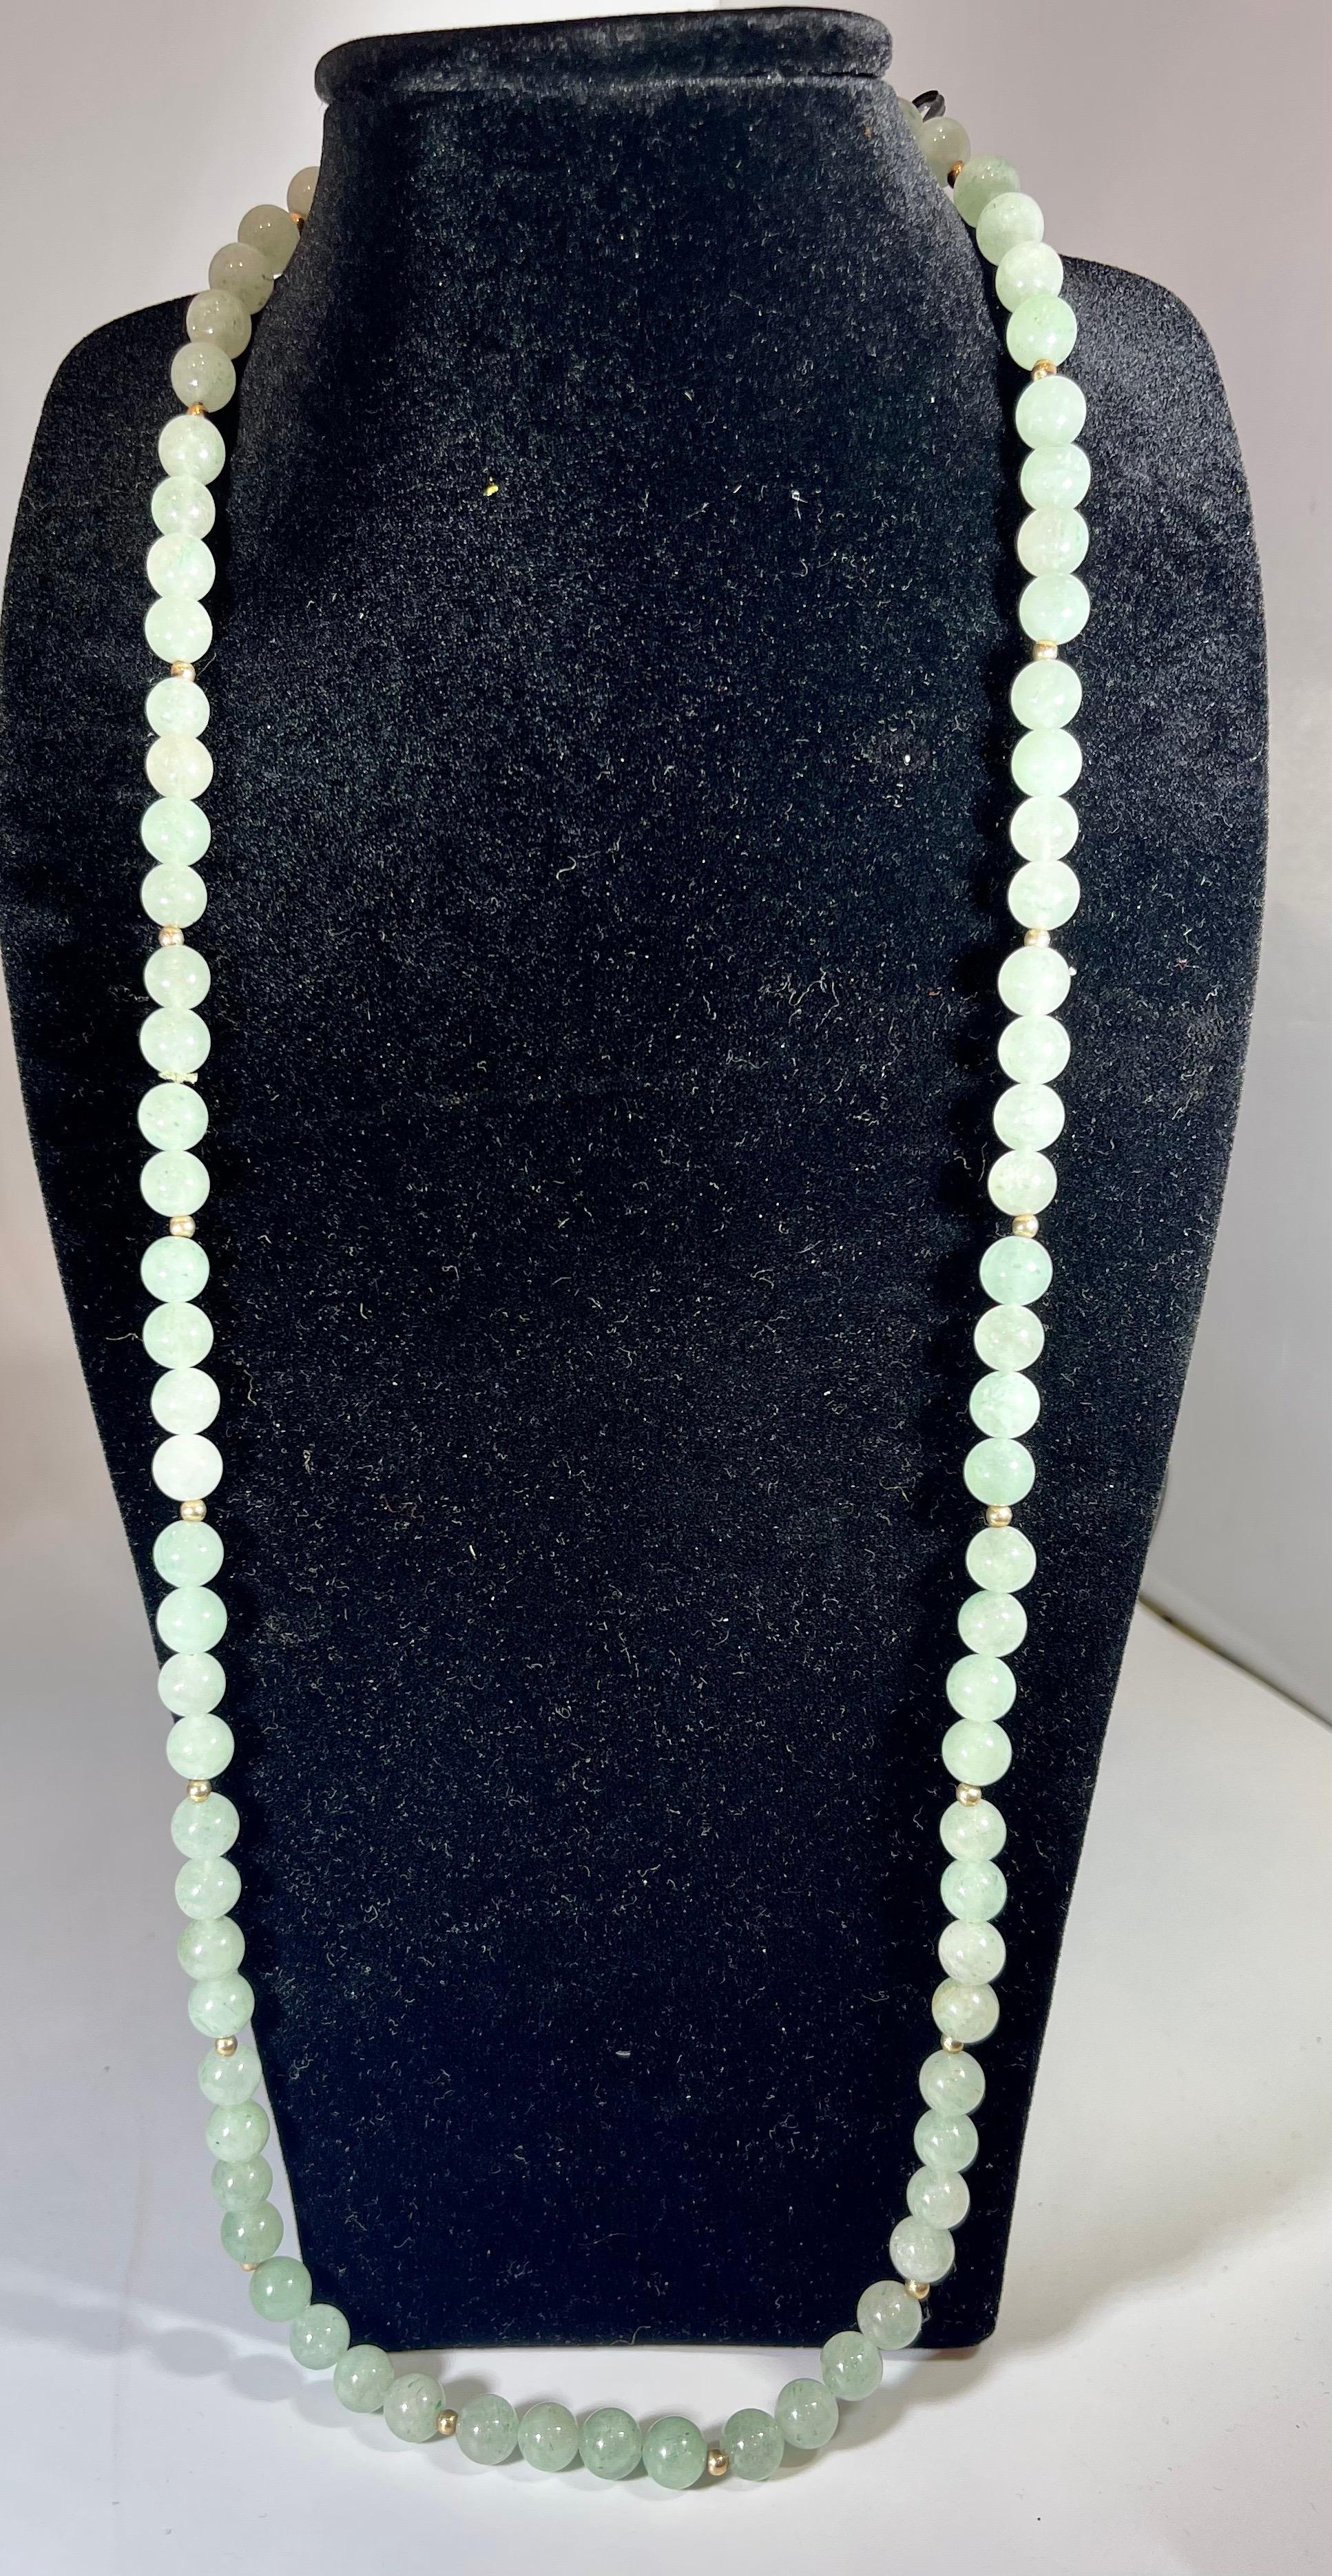 Grade A+ Green Quartz Crystal Bead Necklace 8.5 mm With 14 K Gold Beads, Genuine For Sale 4